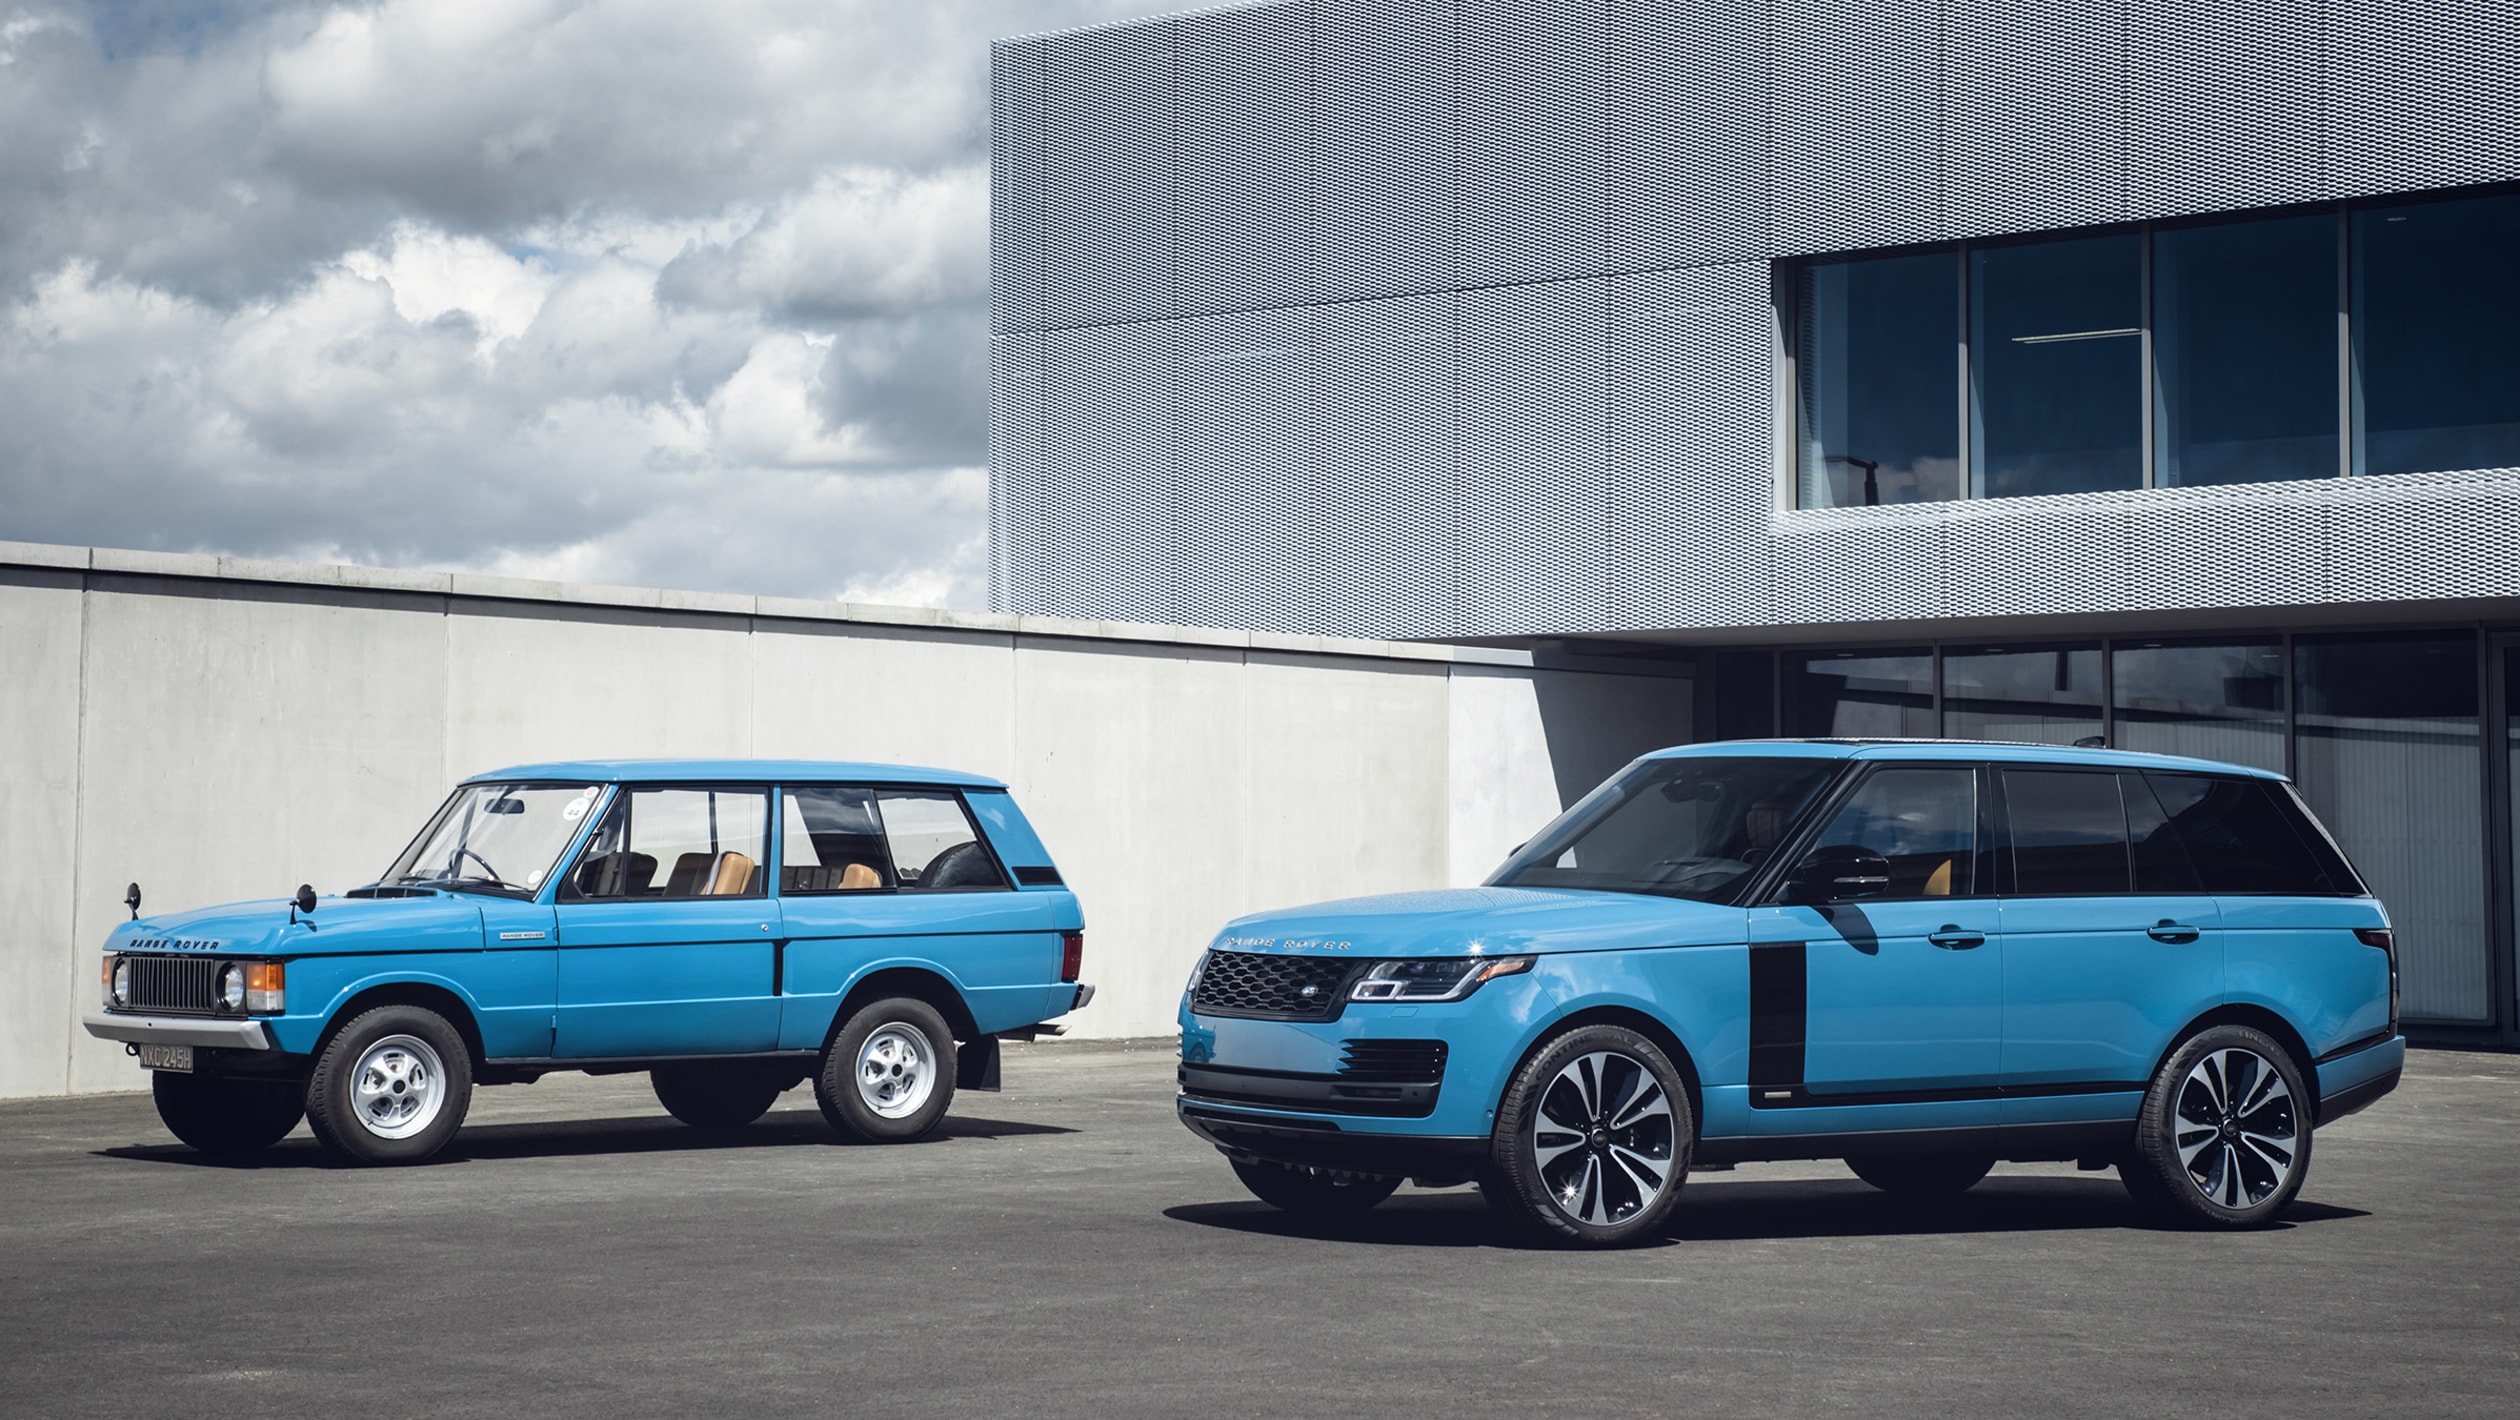 New 2020 Range Rover Fifty marks 50th anniversary of brand icon